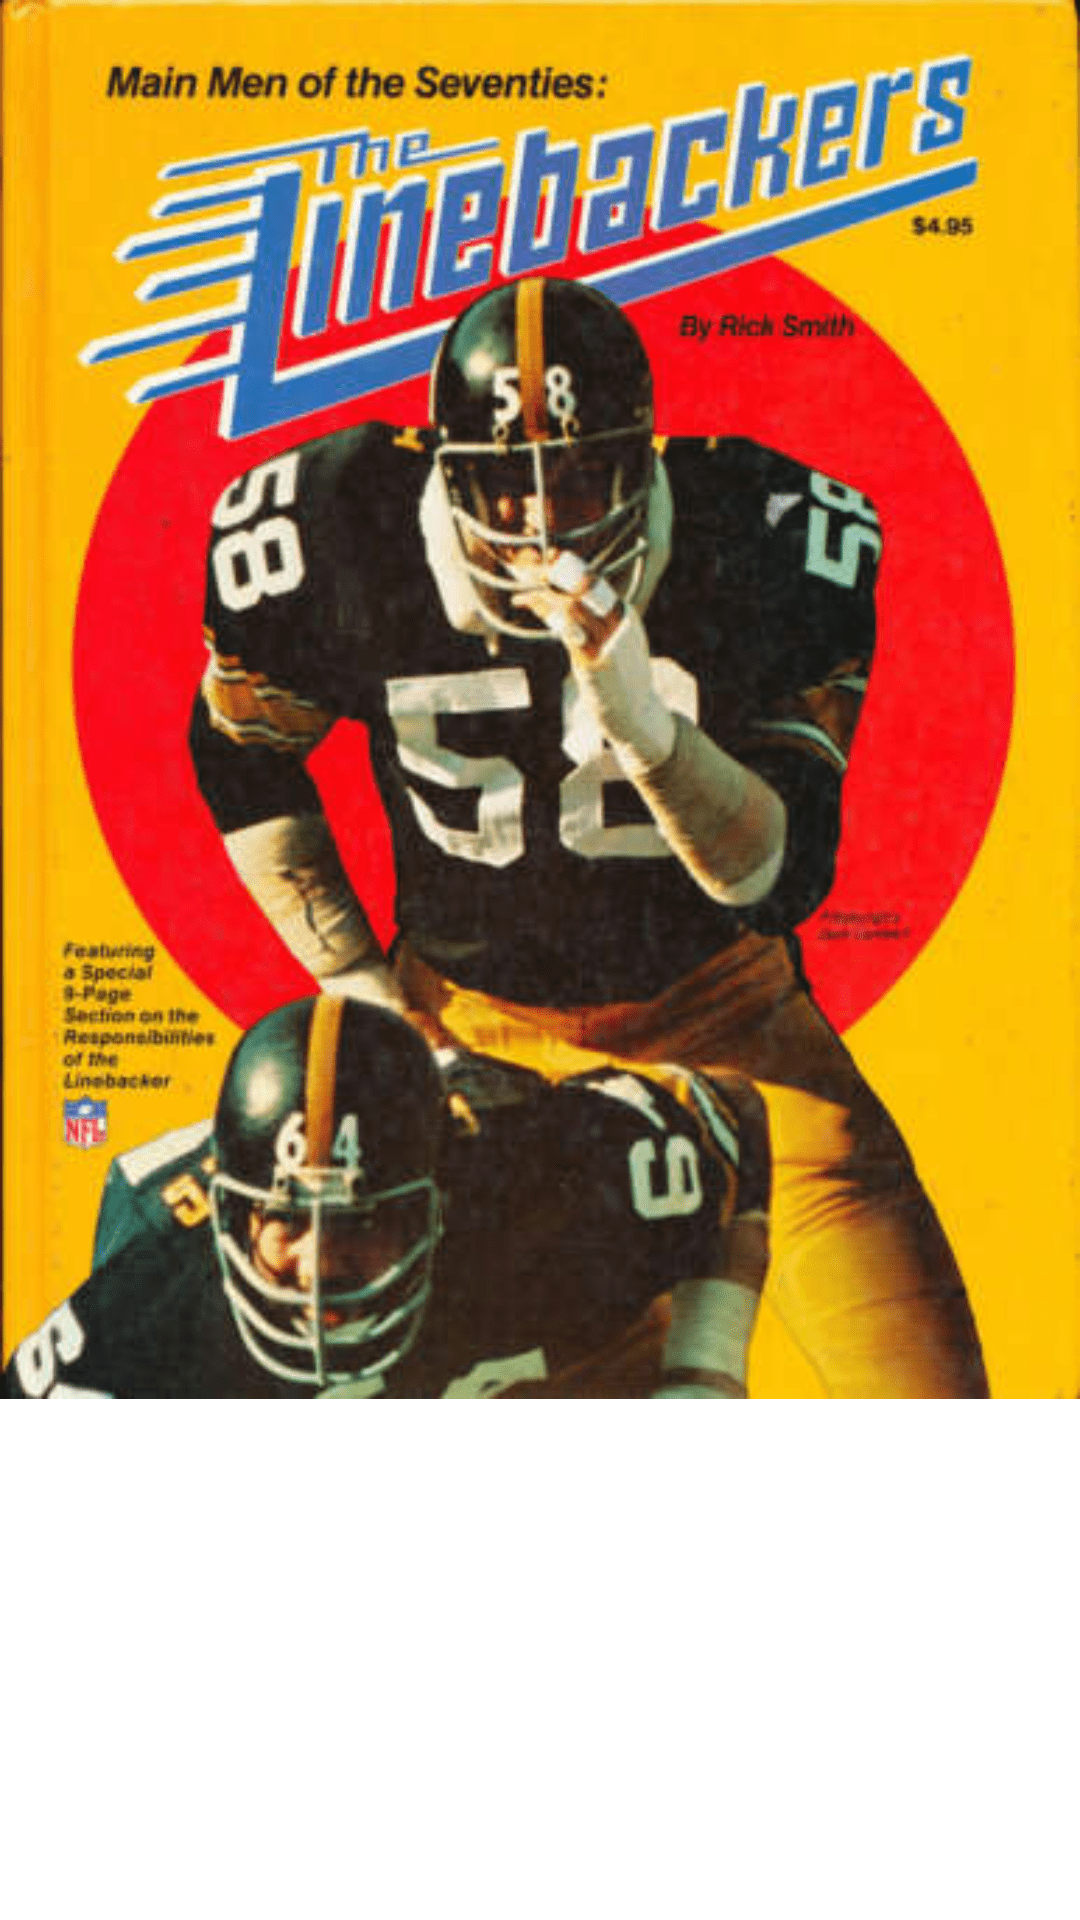 Main men of the seventies: The linebackers